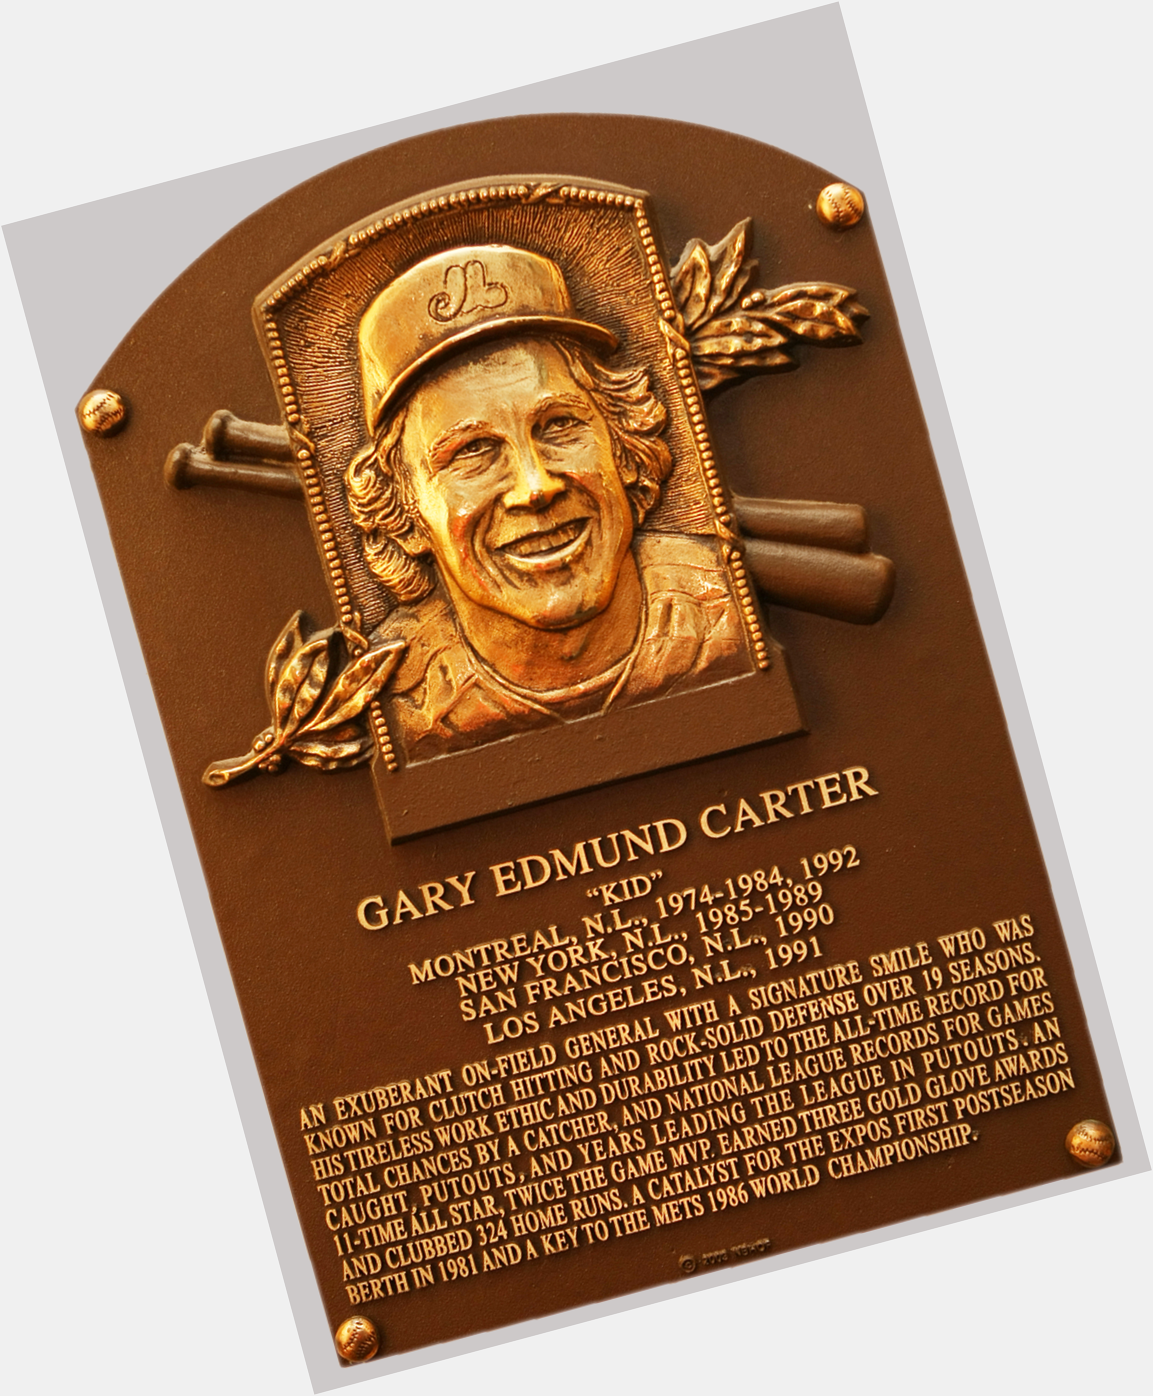 My buddy reminds us Happy 63rd birthday to Gary Carter in the Great Beyond. RIP, 